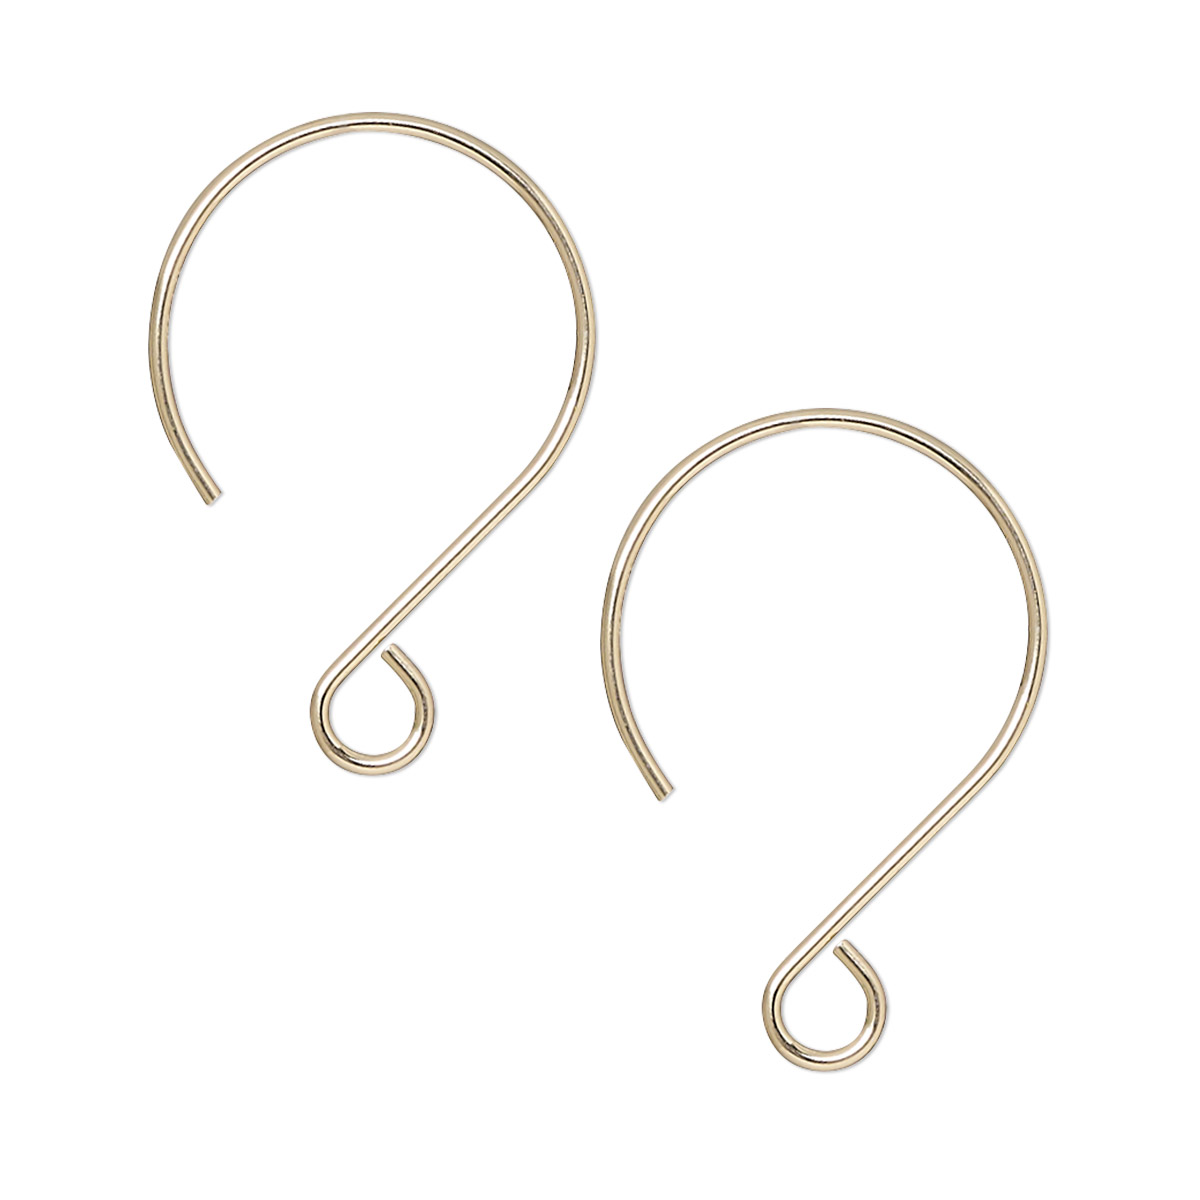 Ear wire, 14Kt gold-filled, 24mm French hook with open loop, 20 gauge ...